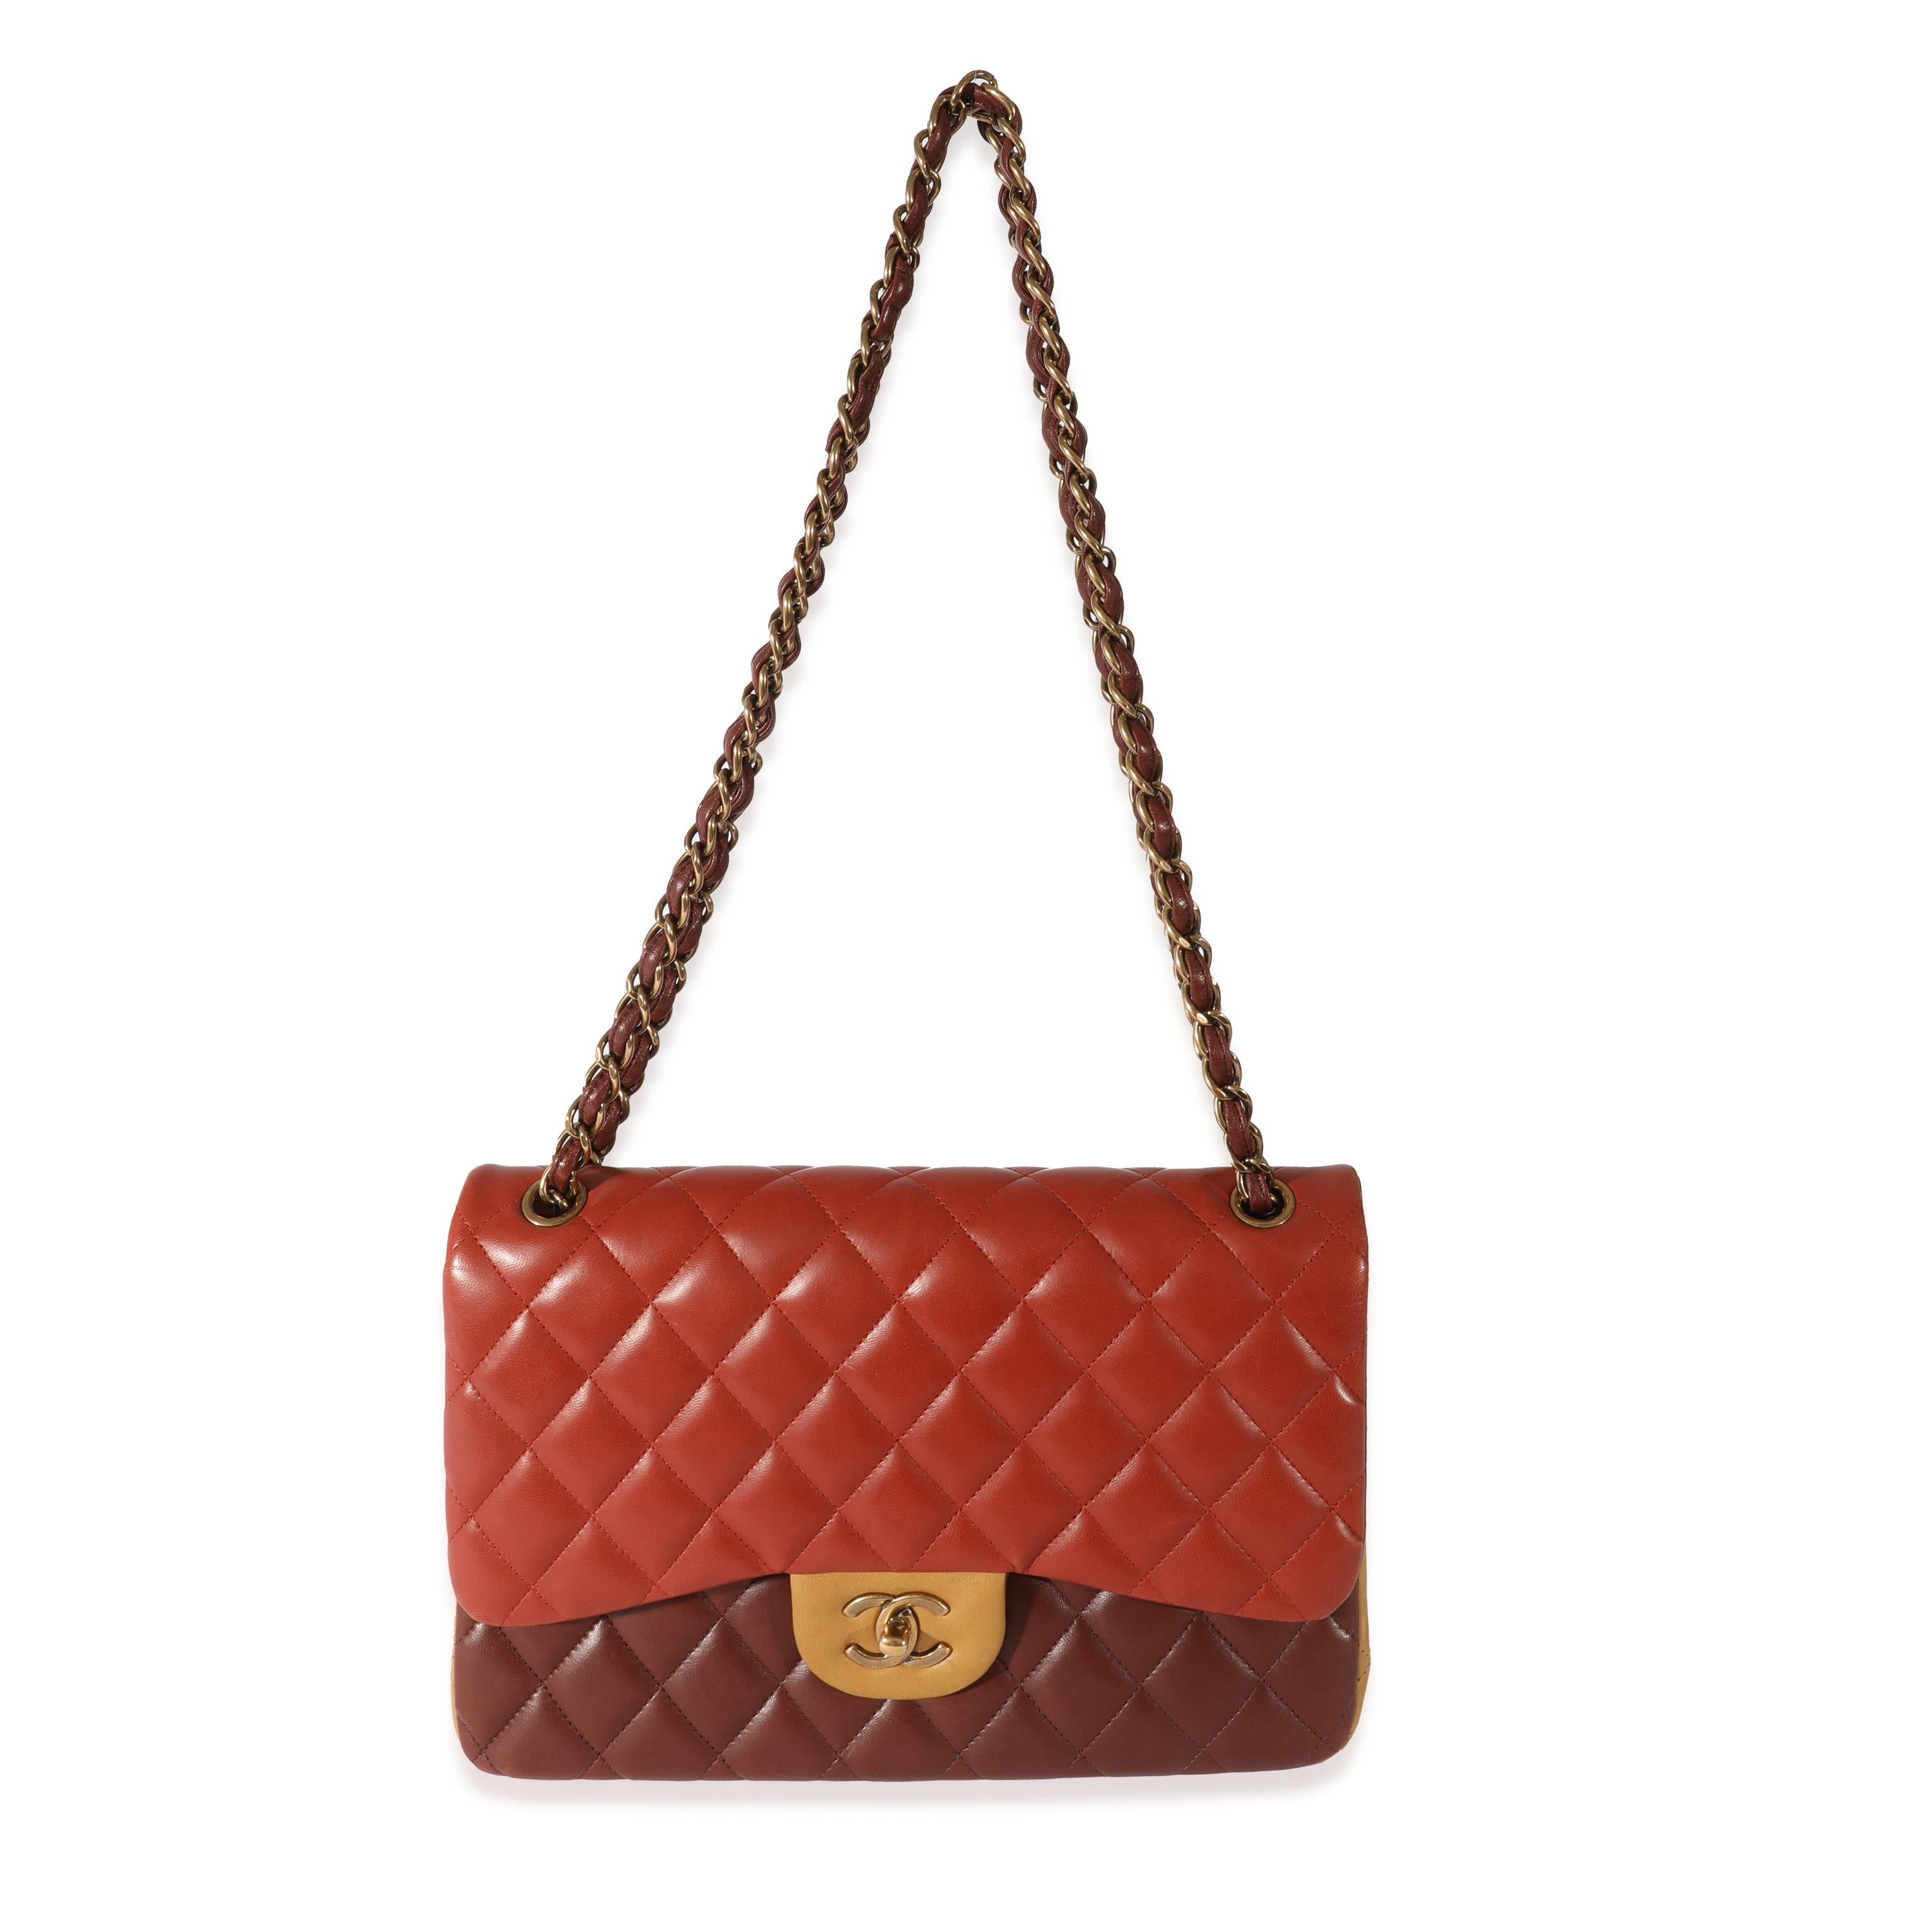 Listing Title: Chanel Tri-Color Lambskin Jumbo Double Flap Bag
 SKU: 128619
 Condition: Pre-owned 
 Condition Description: A timeless classic that never goes out of style, the flap bag from Chanel dates back to 1955 and has seen a number of updates.